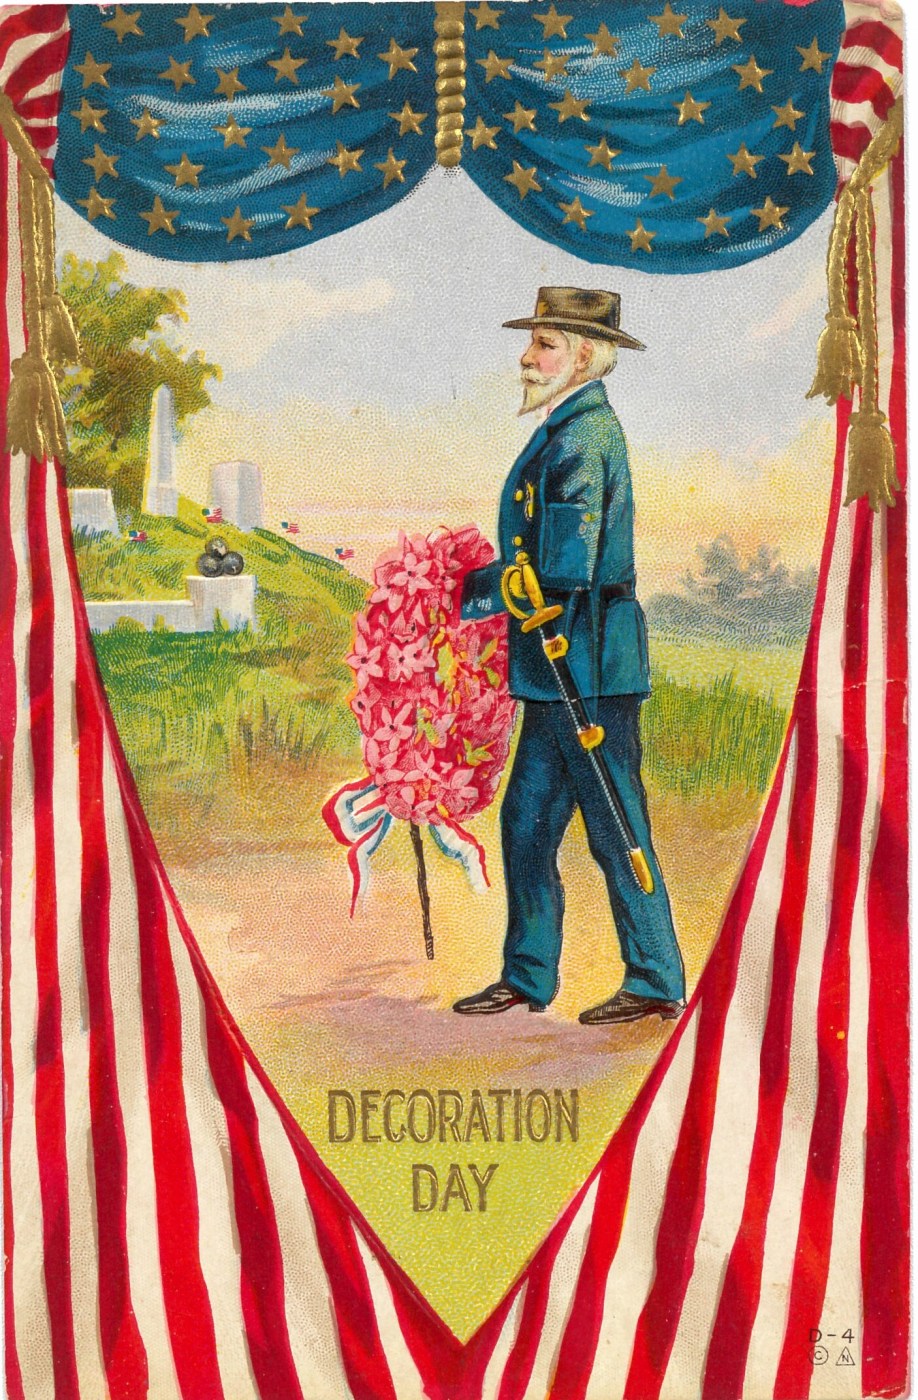 “Decoration Day,” gold highlights, embossed, unused, post 1907, no publisher. Old Union soldier carrying wreath to cemetery, framed by American flag elements. (NCA)